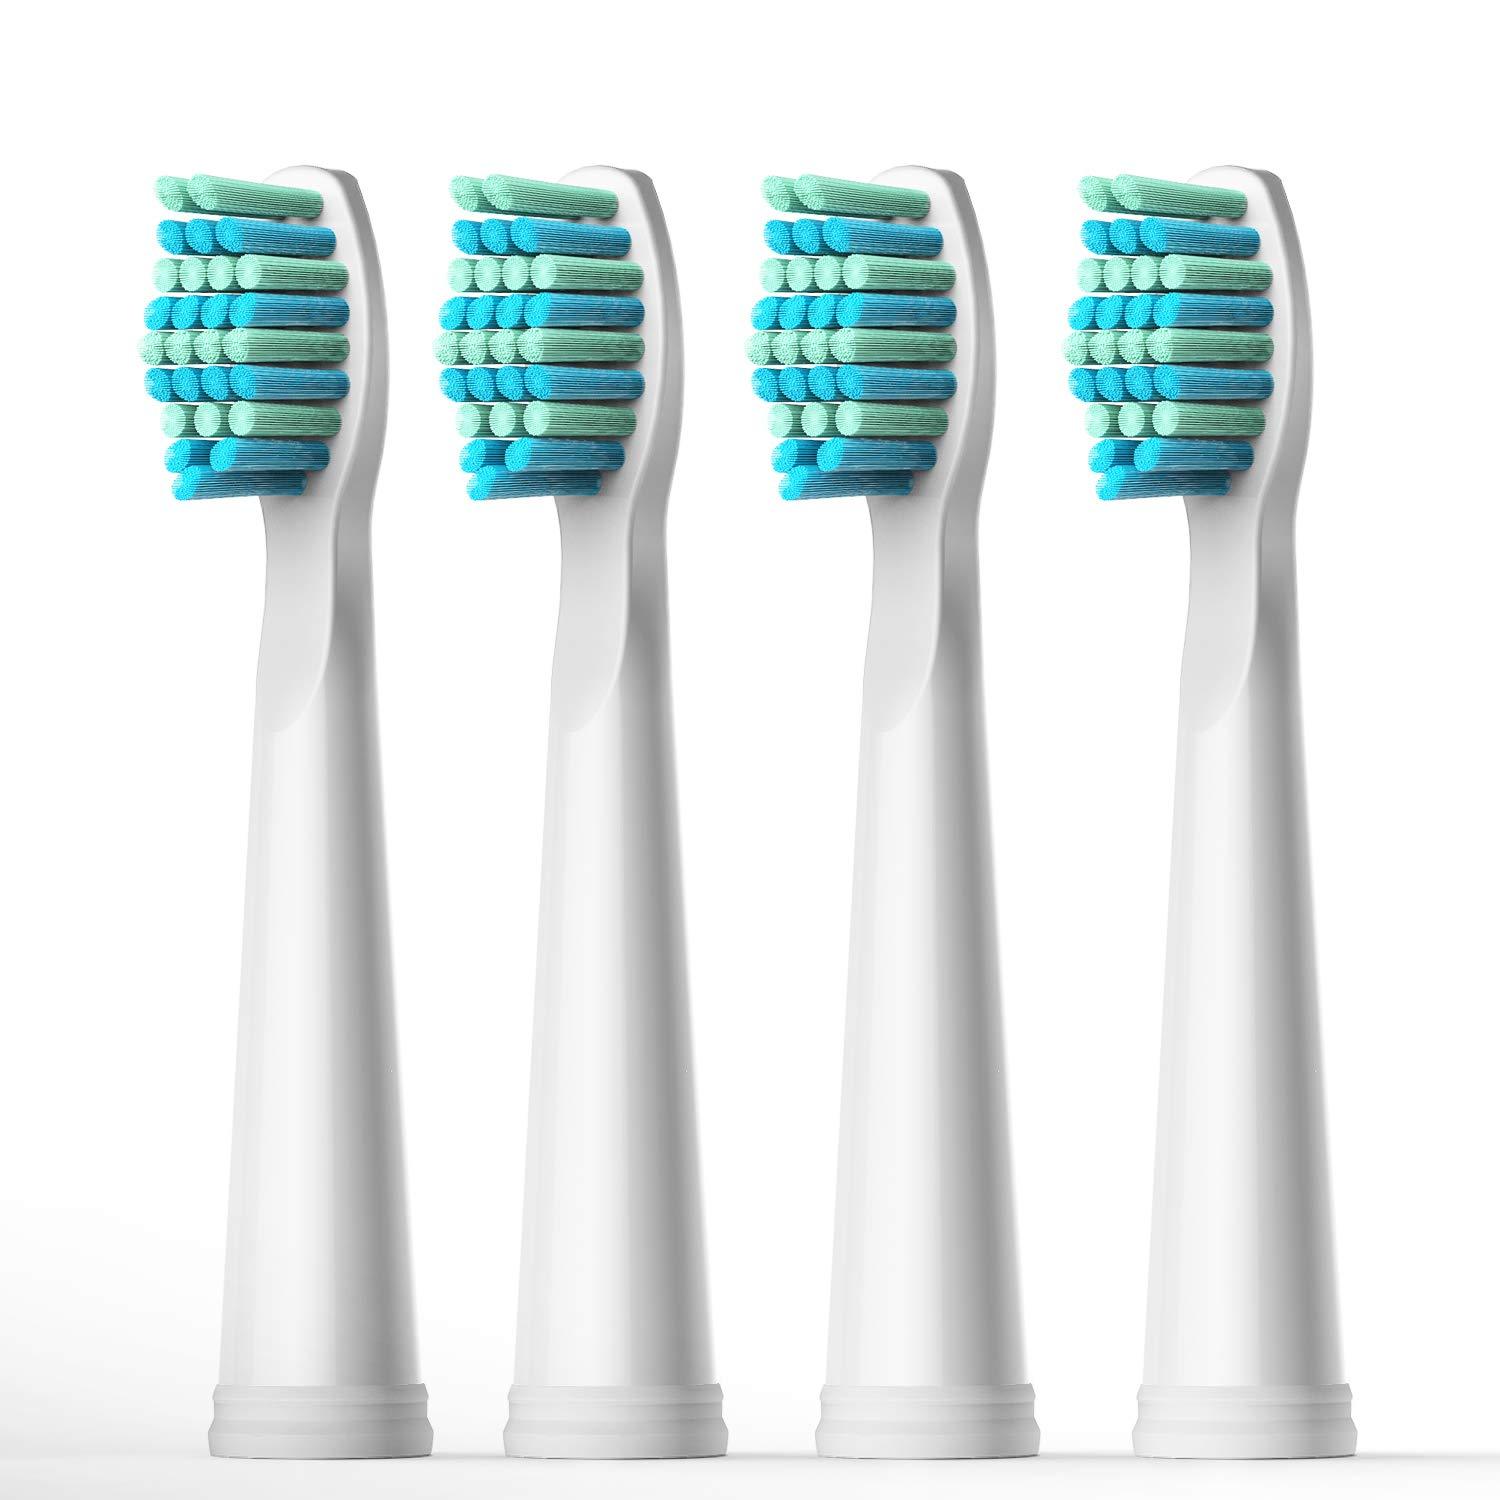 Fairywill White Soft Replacement Toothbrush Heads X 4 Fw 01 Fairywill Electric Toothbrush